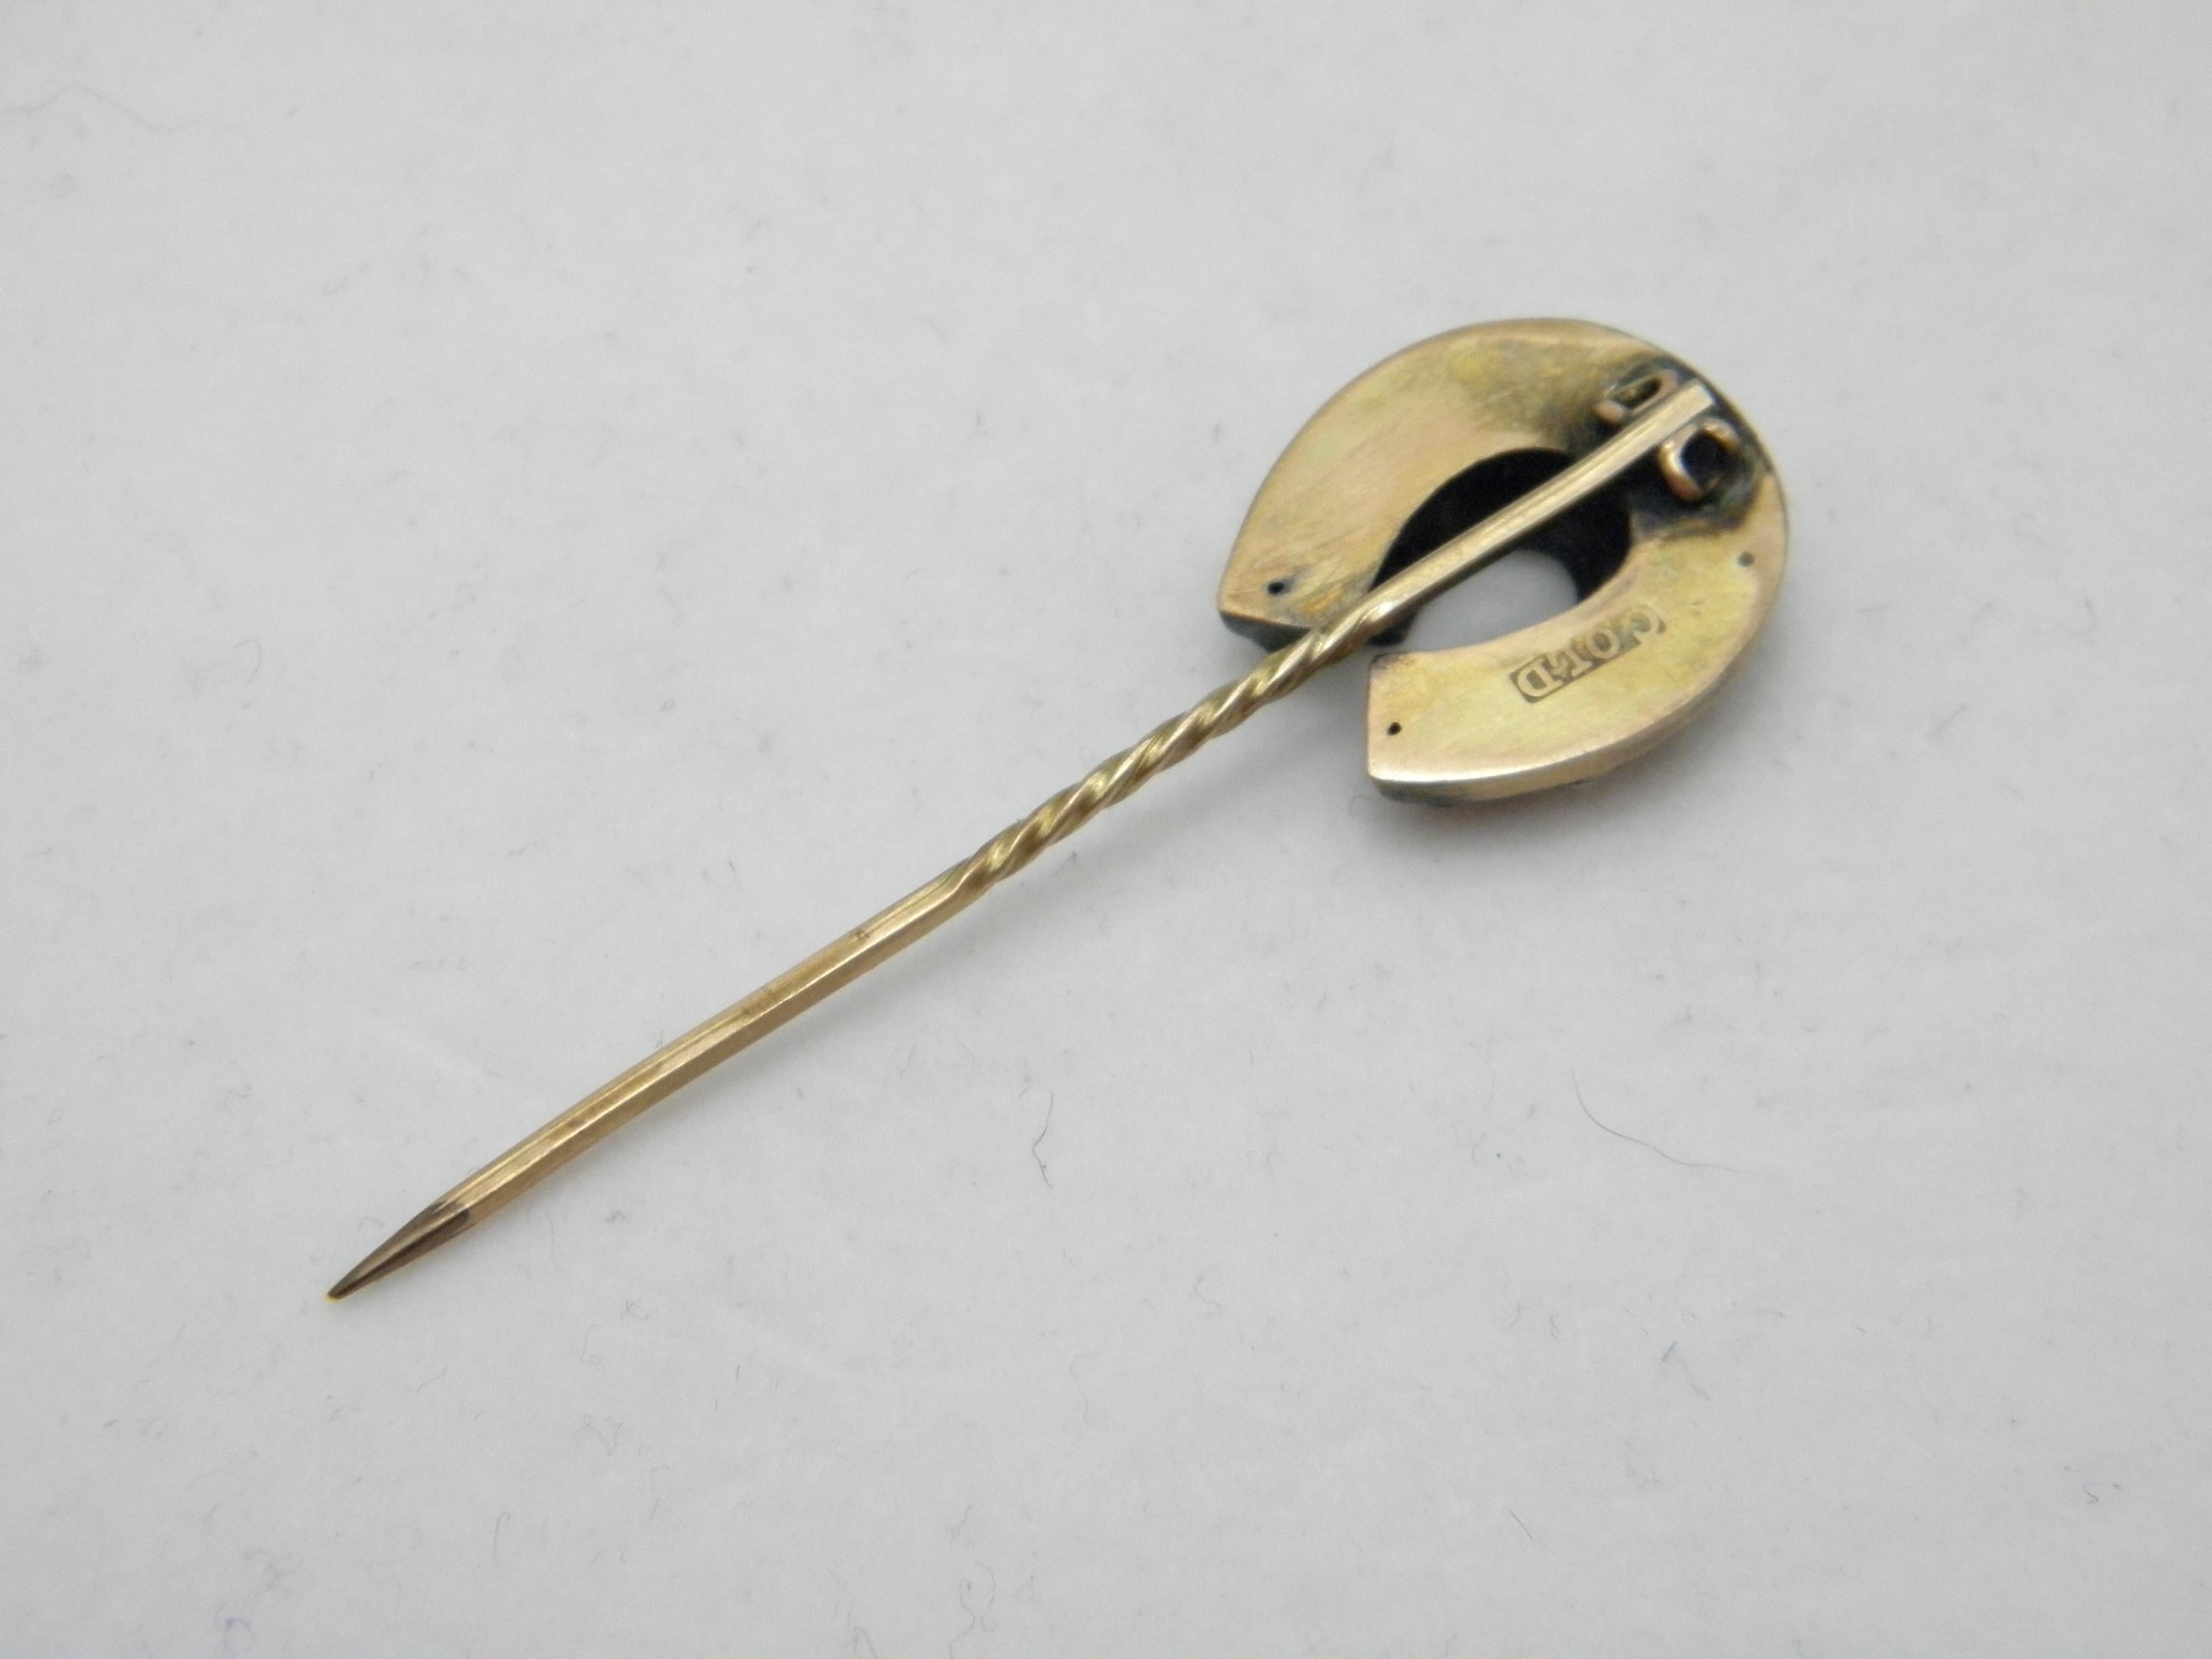 Antique 15ct Gold Diamond Paste Horseshoe Pin Brooch c1840 2.5g 625 Purity For Sale 1